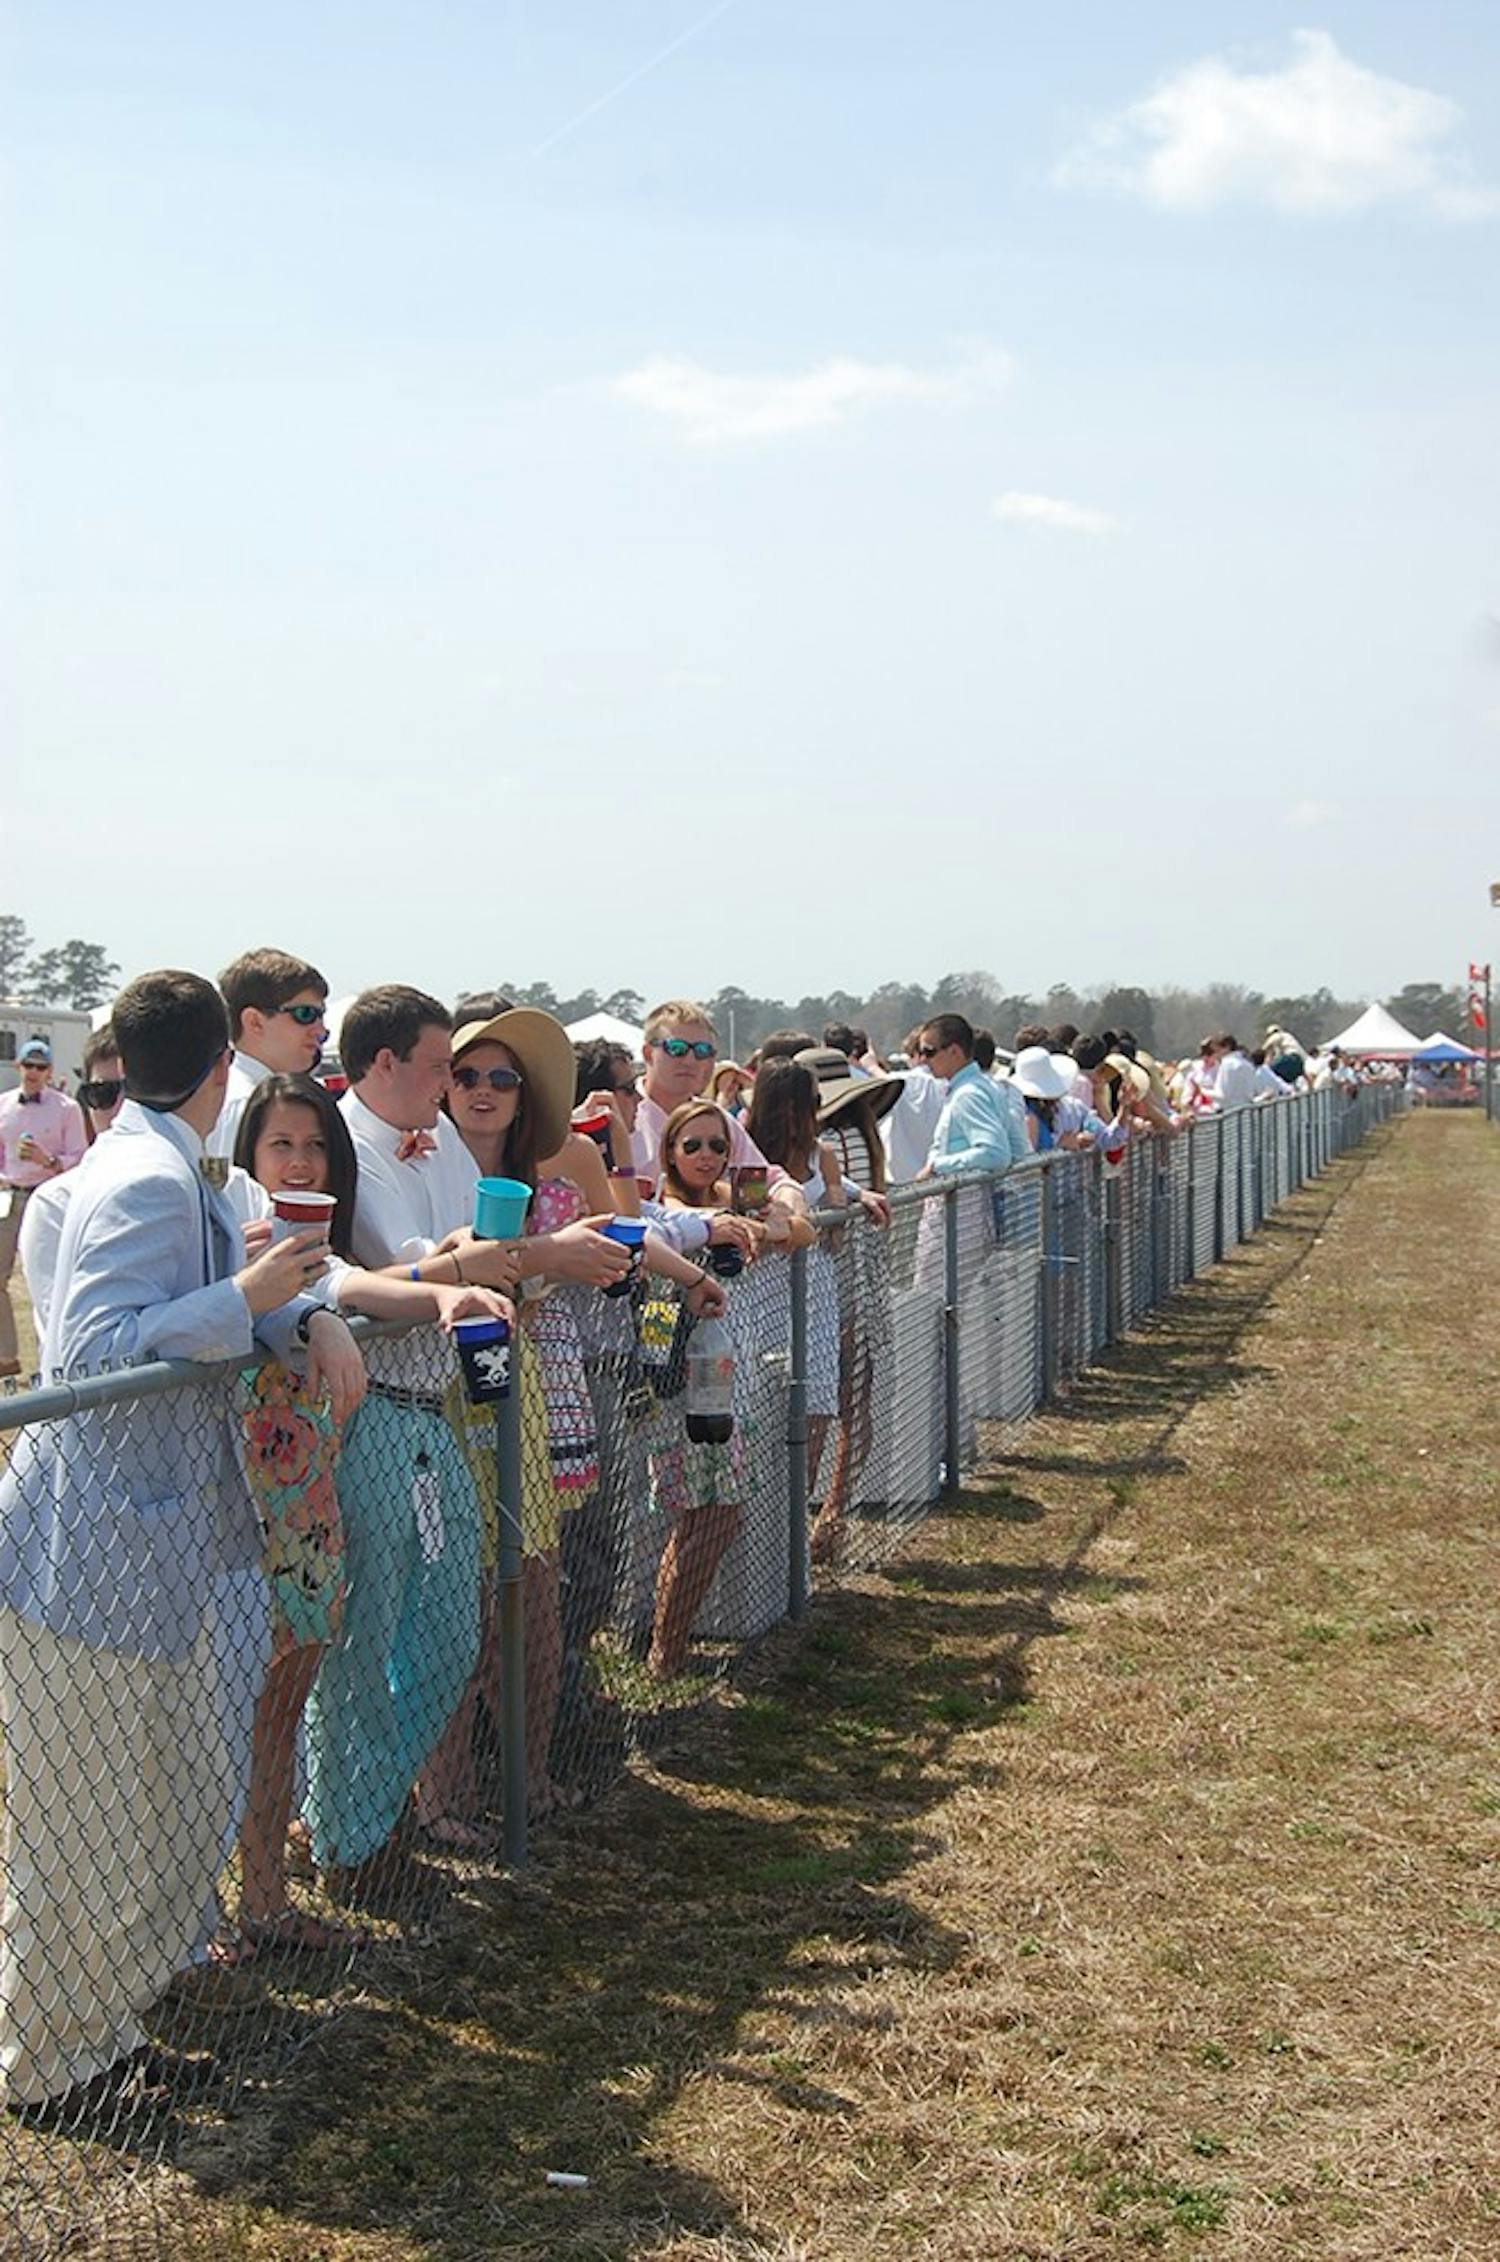 	Spectators made the trek from the tent to the track to watch the horse races.